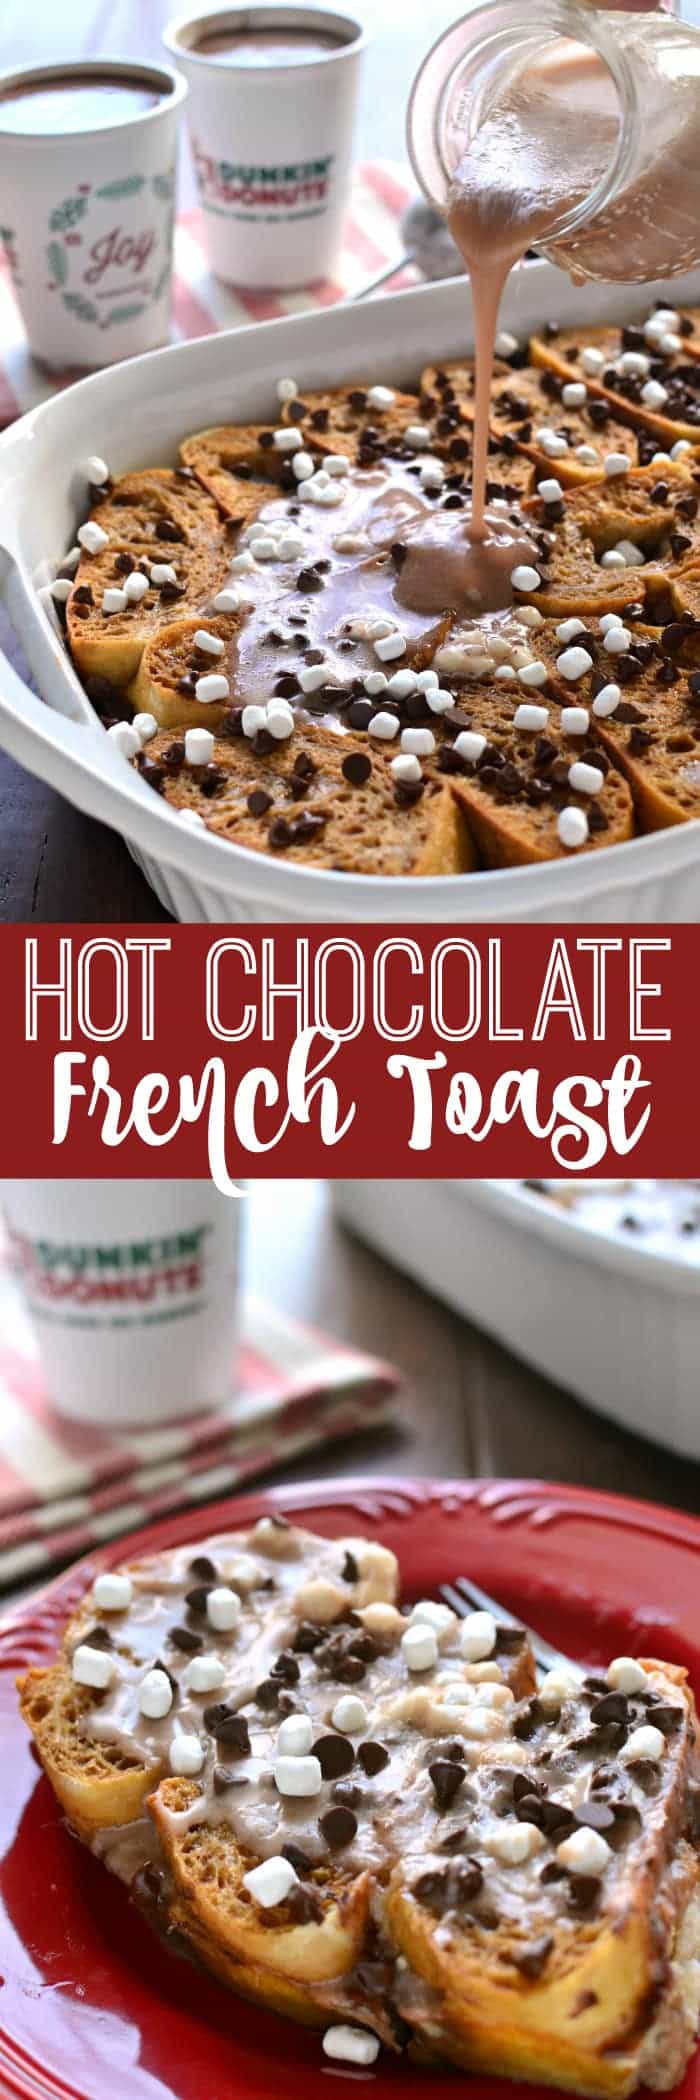 Overnight Hot Chocolate Baked French Toast is loaded with hot chocolate and drizzled with a hot chocolate glaze, this decadent breakfast that's worthy of a celebration!